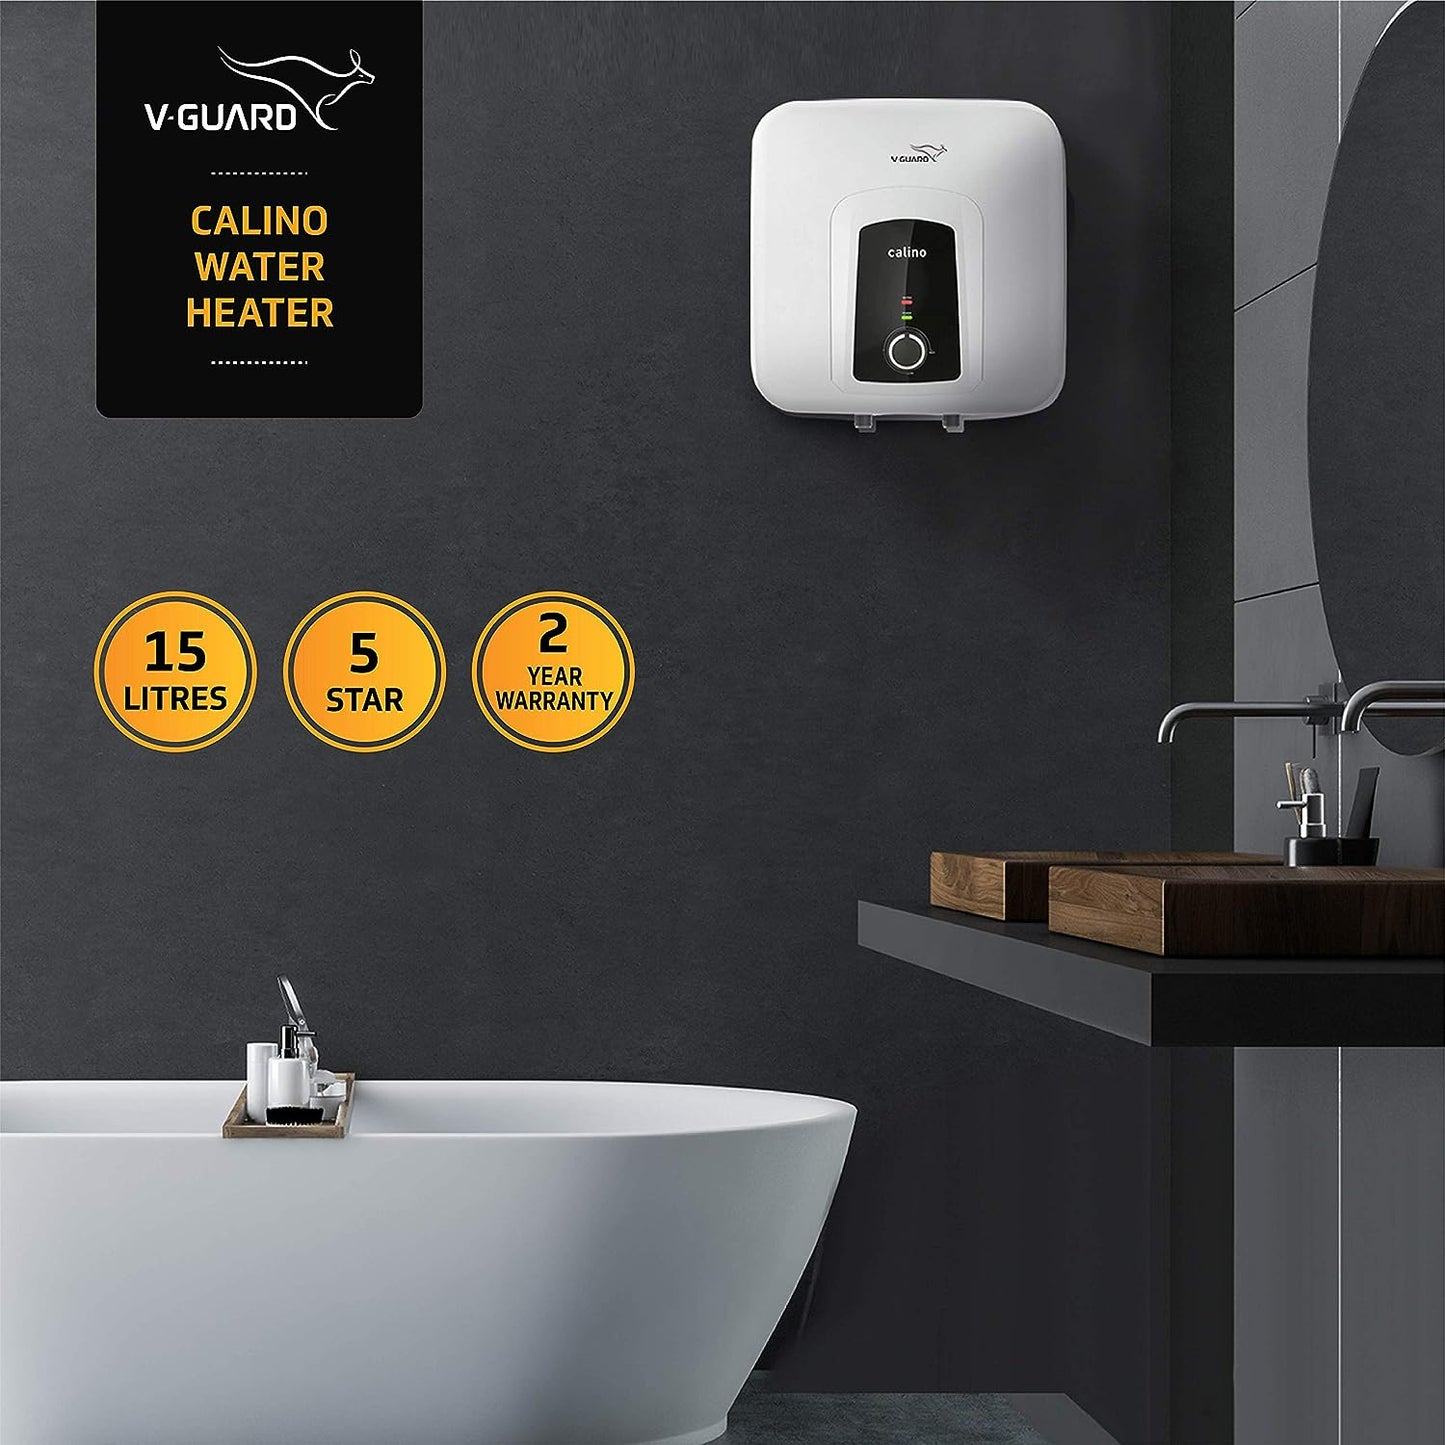 Calino DG 15 L Water Heater with Digital Display, Rust Proof ABS Body and Remote Control